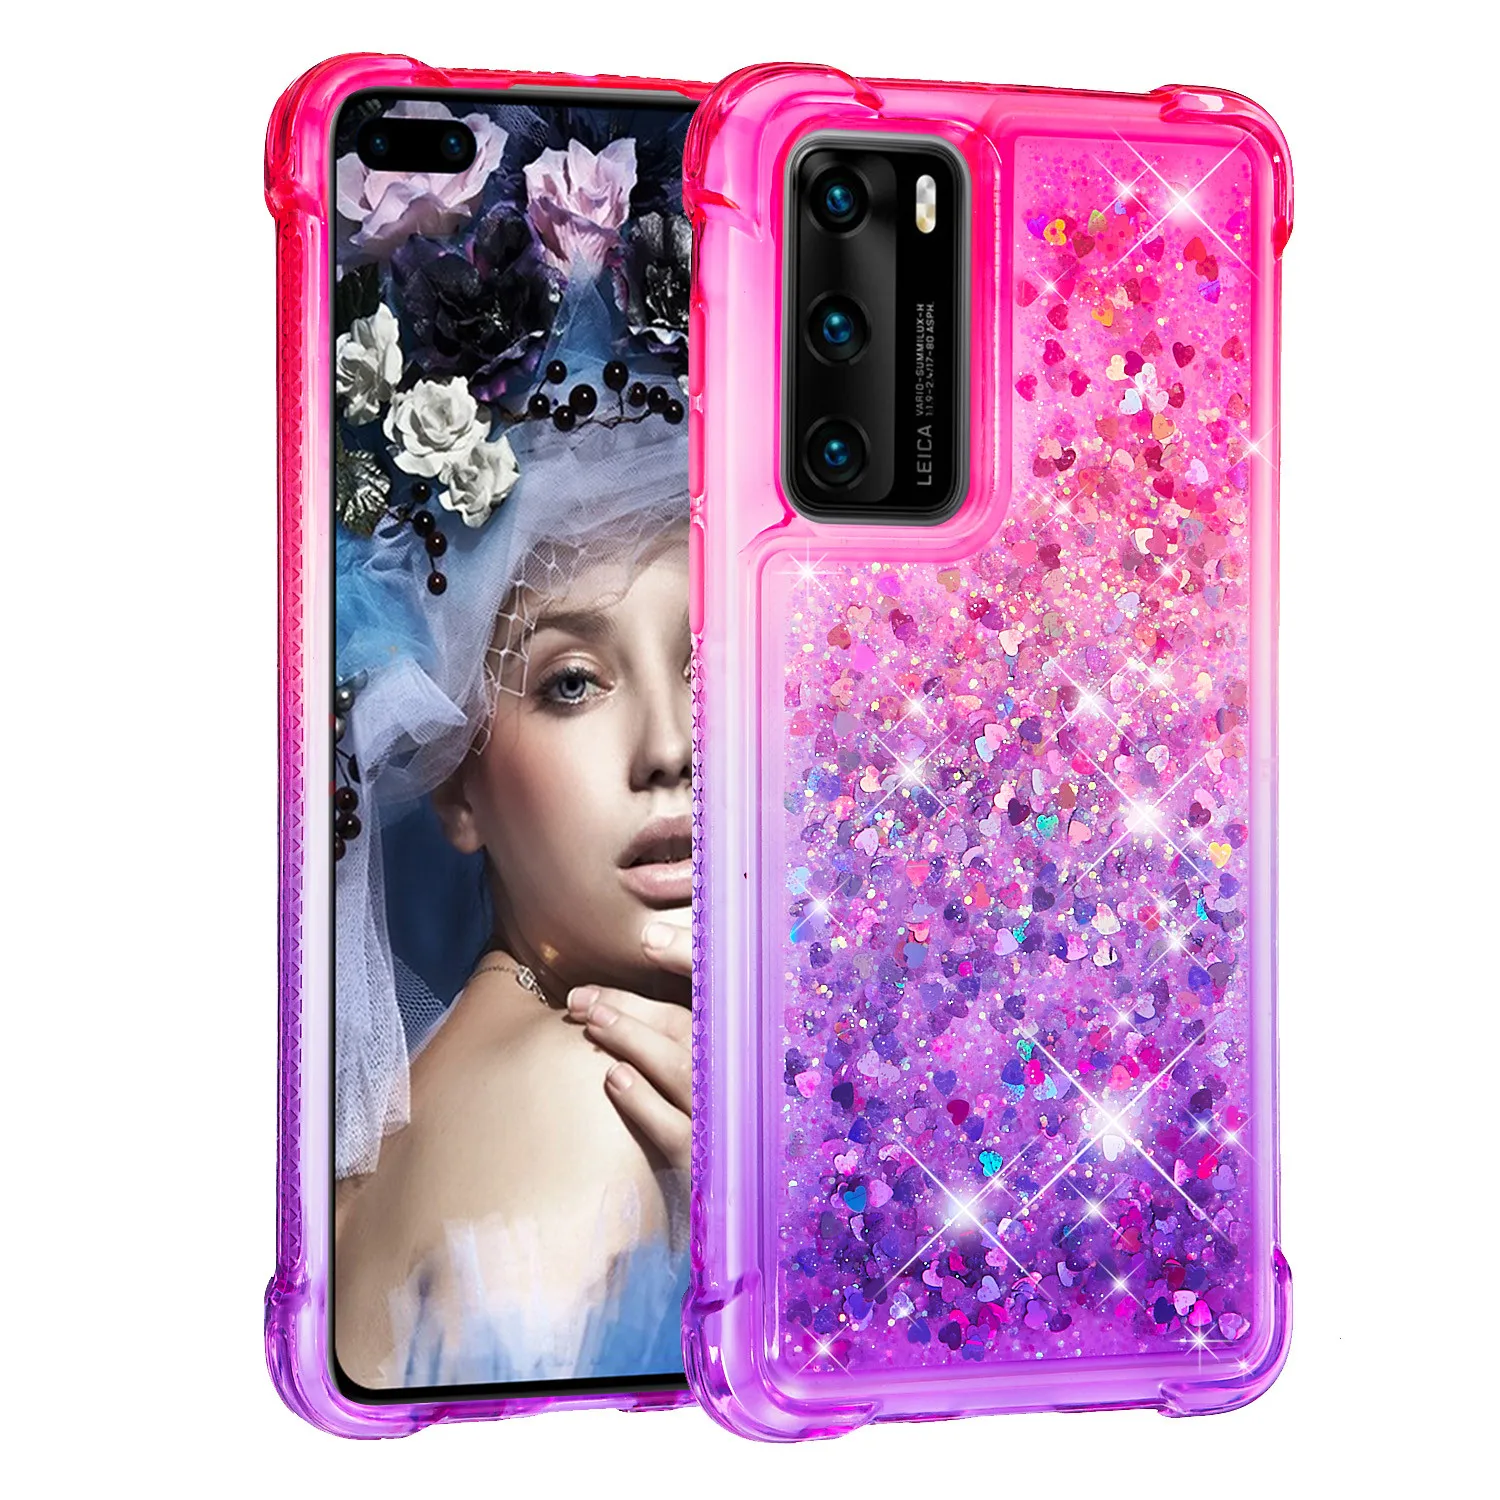 Bling Gitter Phone Cases For Huawei P Smart 2021 P40 Lite Mate 30 Pro P Smart 2019 Dynamic Love Heart Quicksand Back Cover Shell huawei silicone case